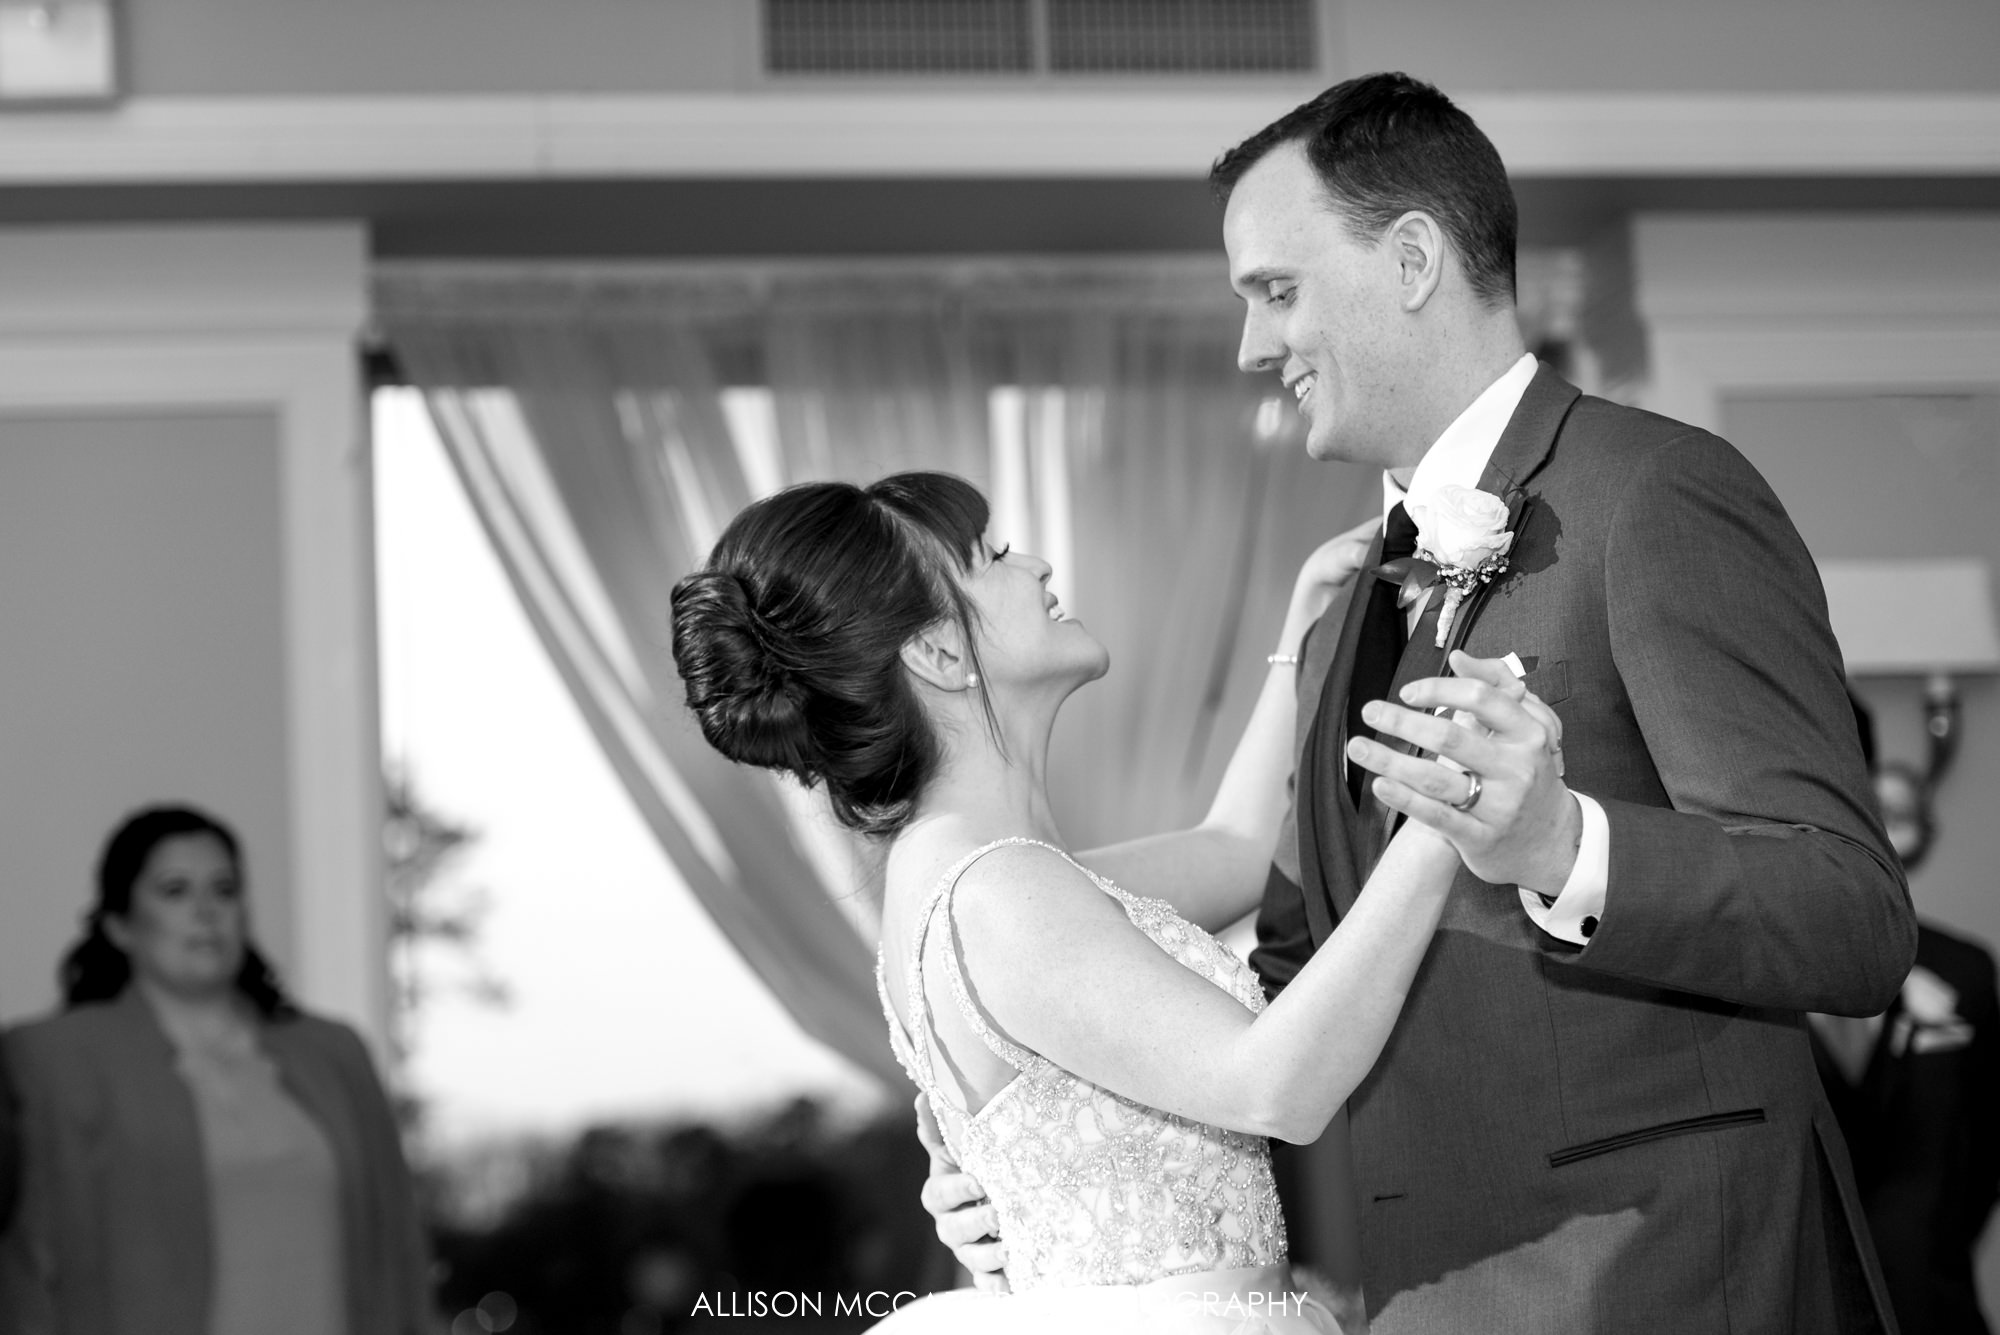 Bride and Groom's first dance